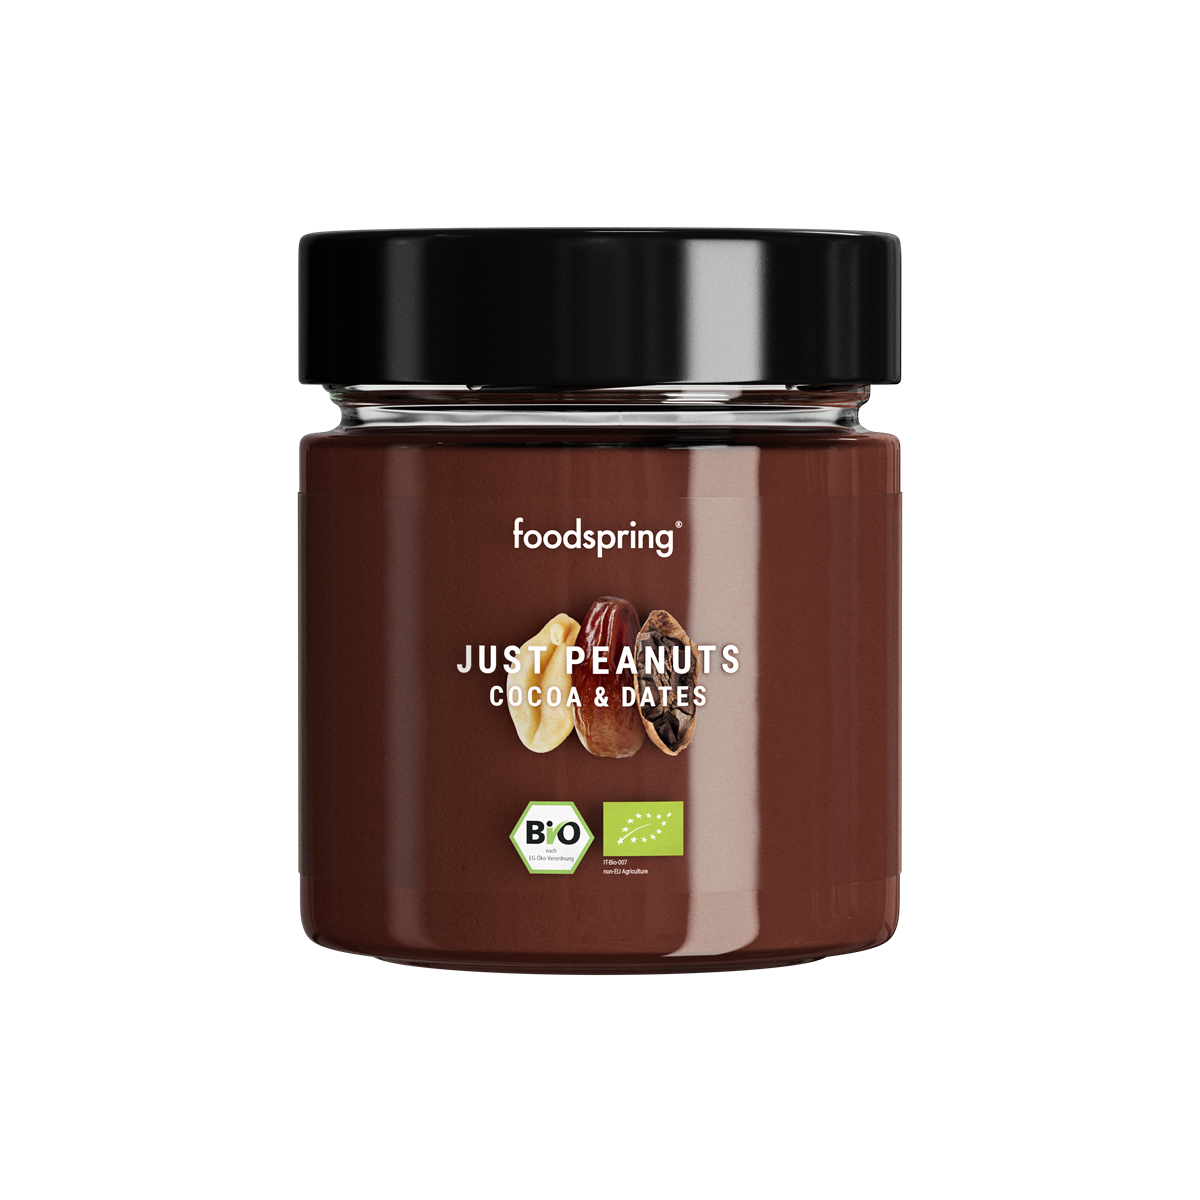 foodspring_Just Nuts_Just_Peanuts_Cocoa_and_Dates_EUR 5,99